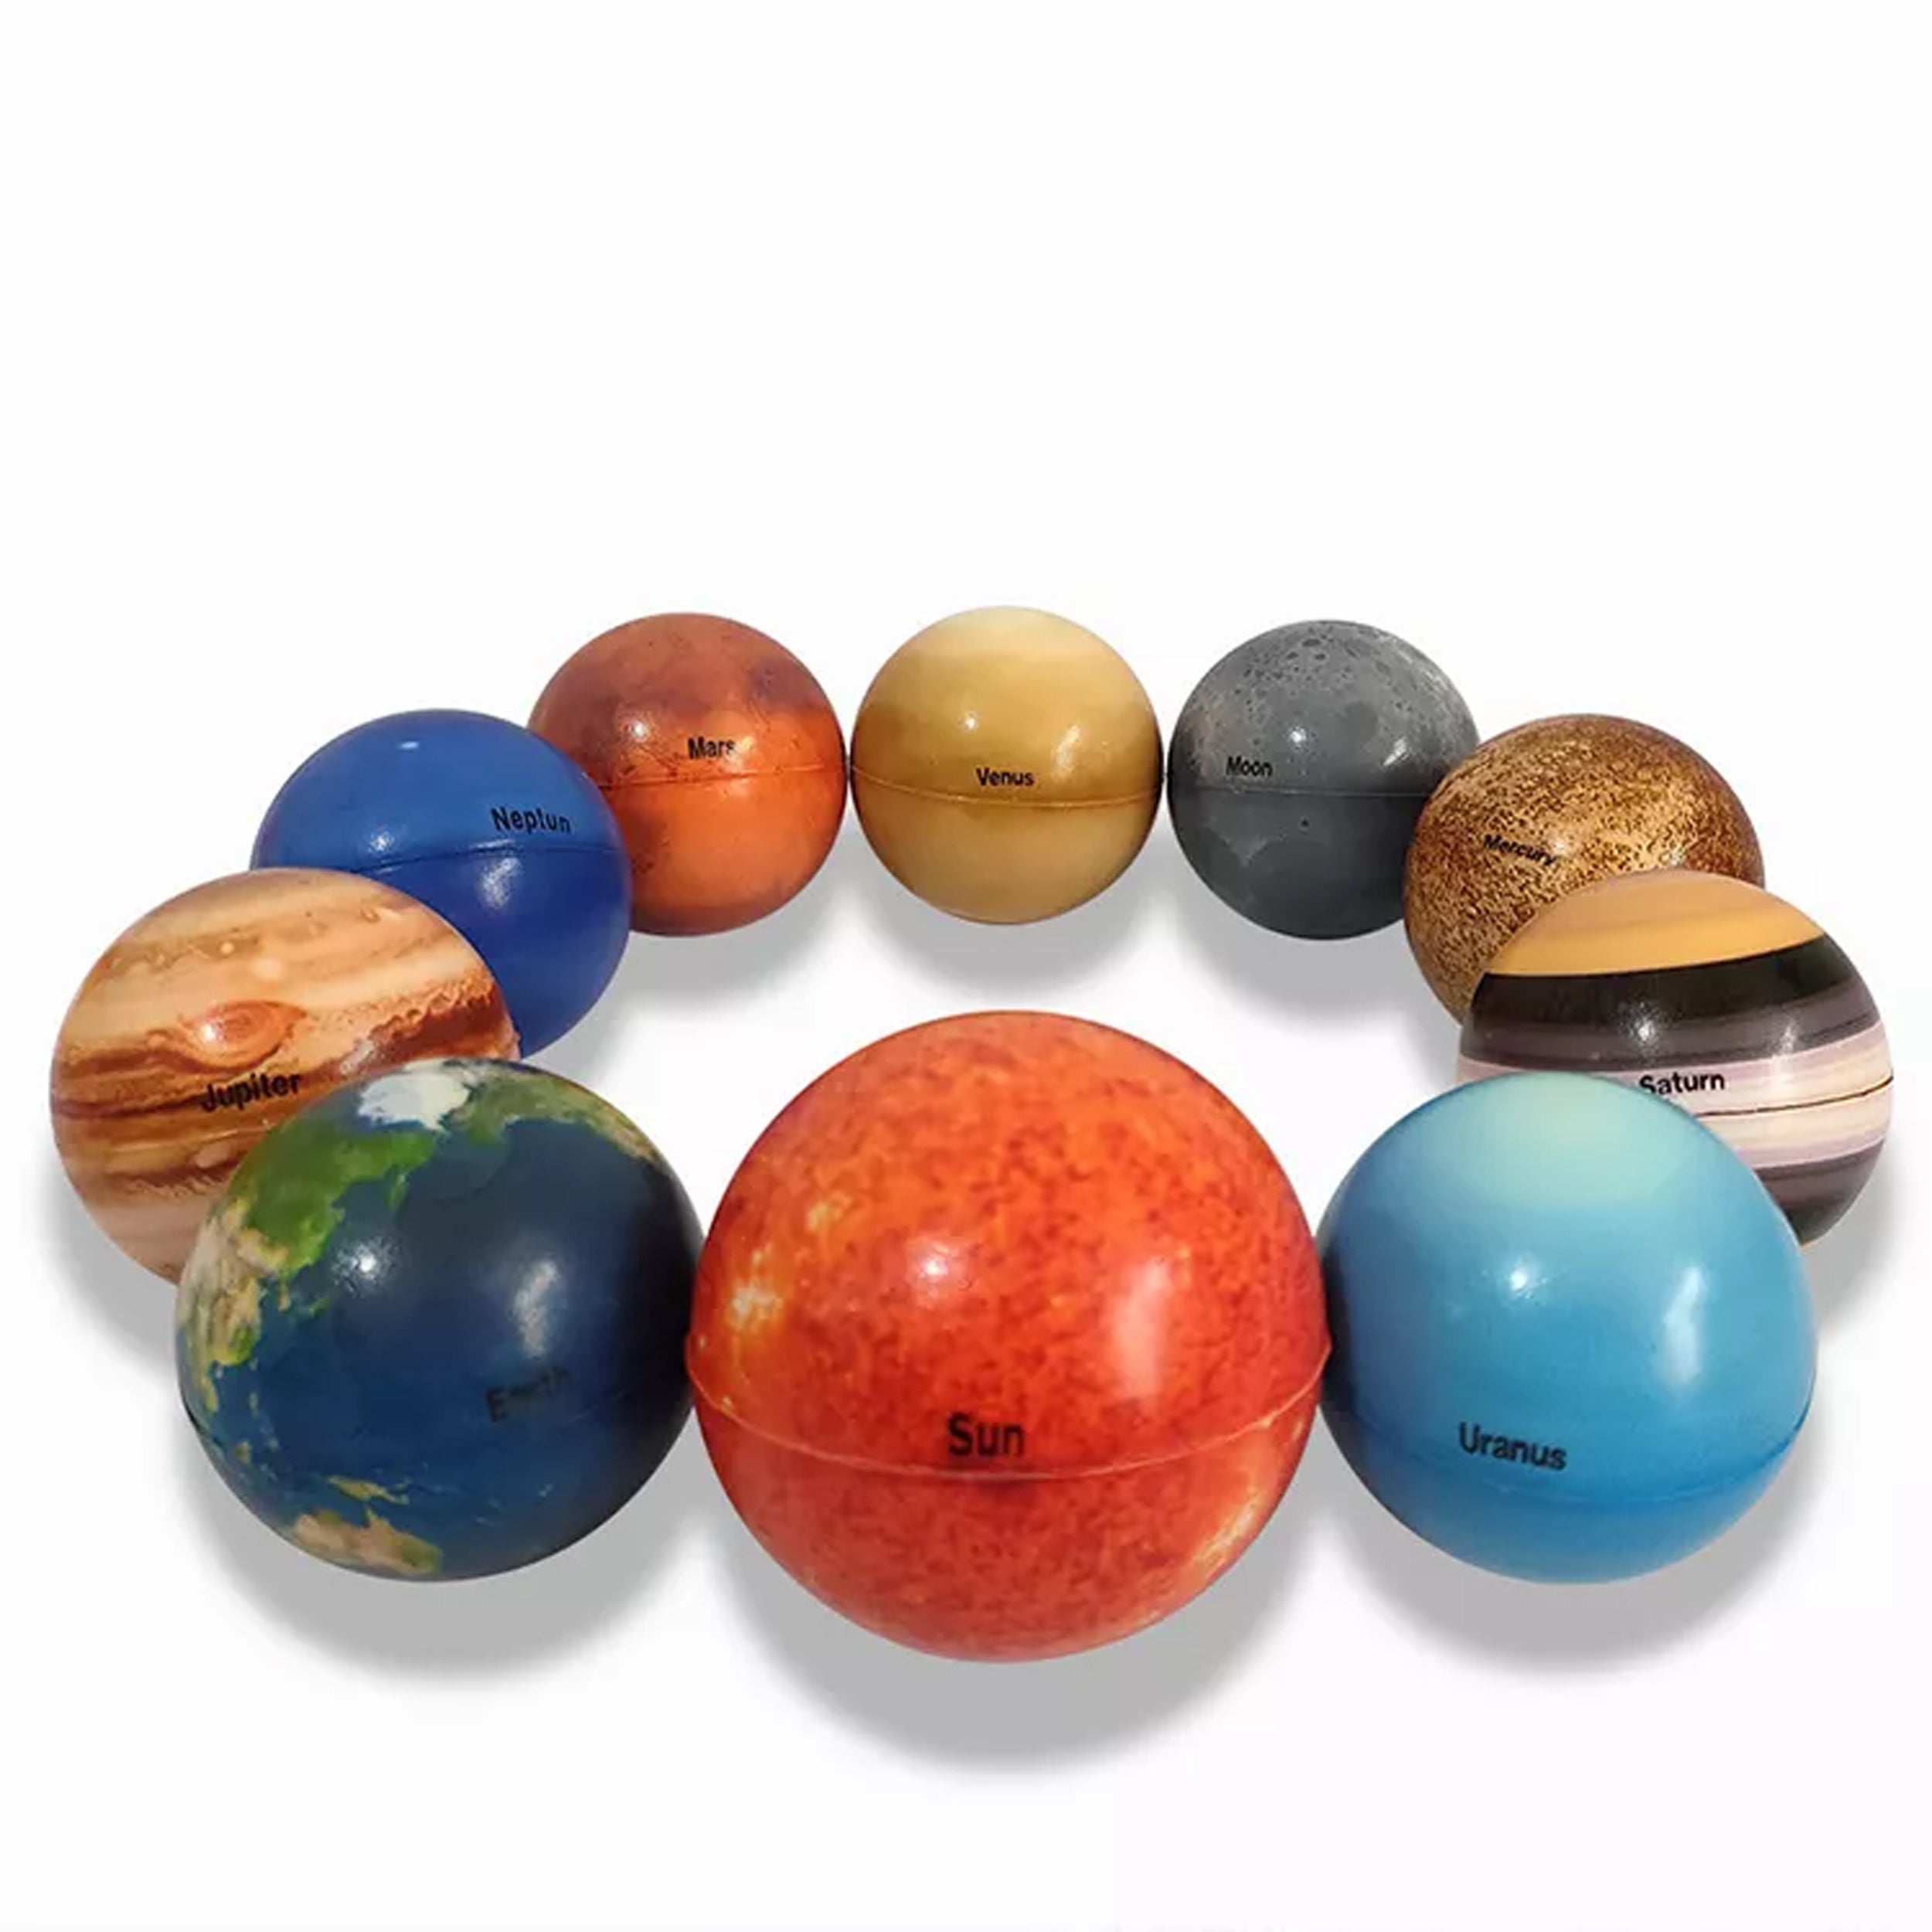 Galactic Squishy Fidget Ball Toy - Explore the Planets